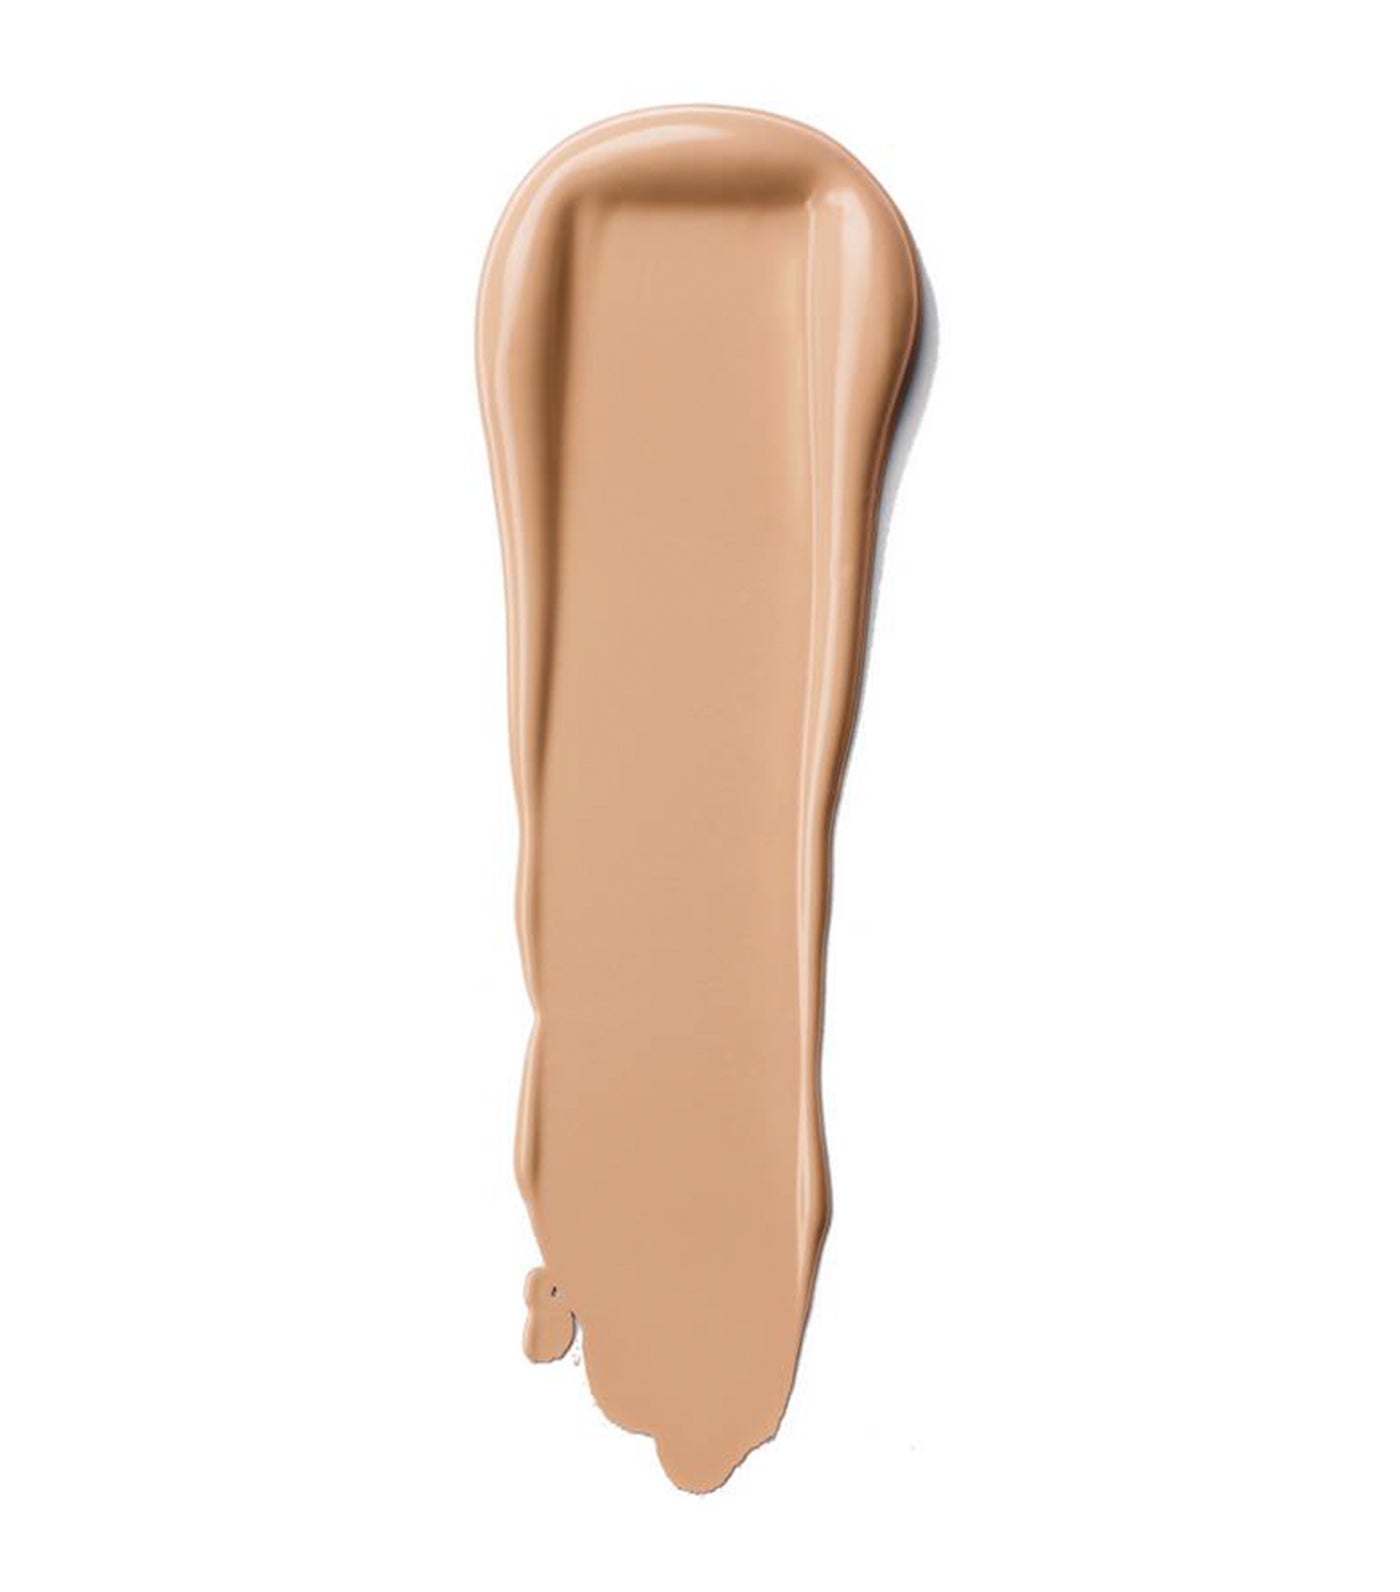 clinique beyond perfecting foundation concealer